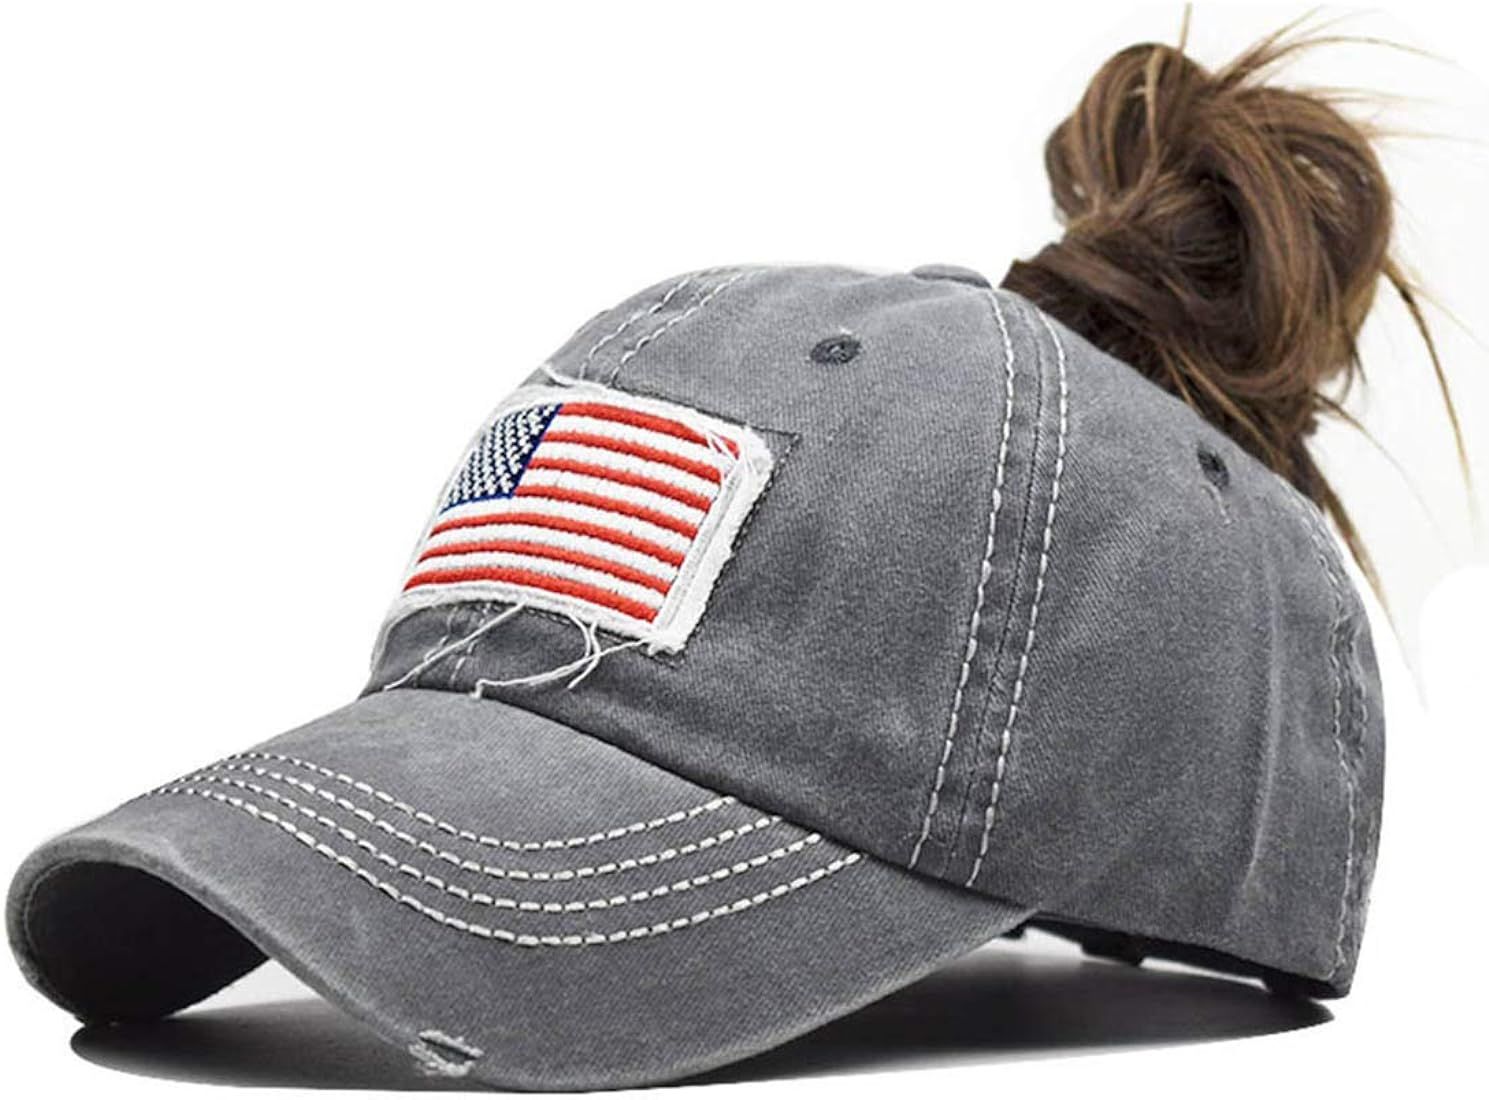 Distressed Ponytail Hat for Women American-Flag Pony Tail Caps High Bun | Amazon (US)